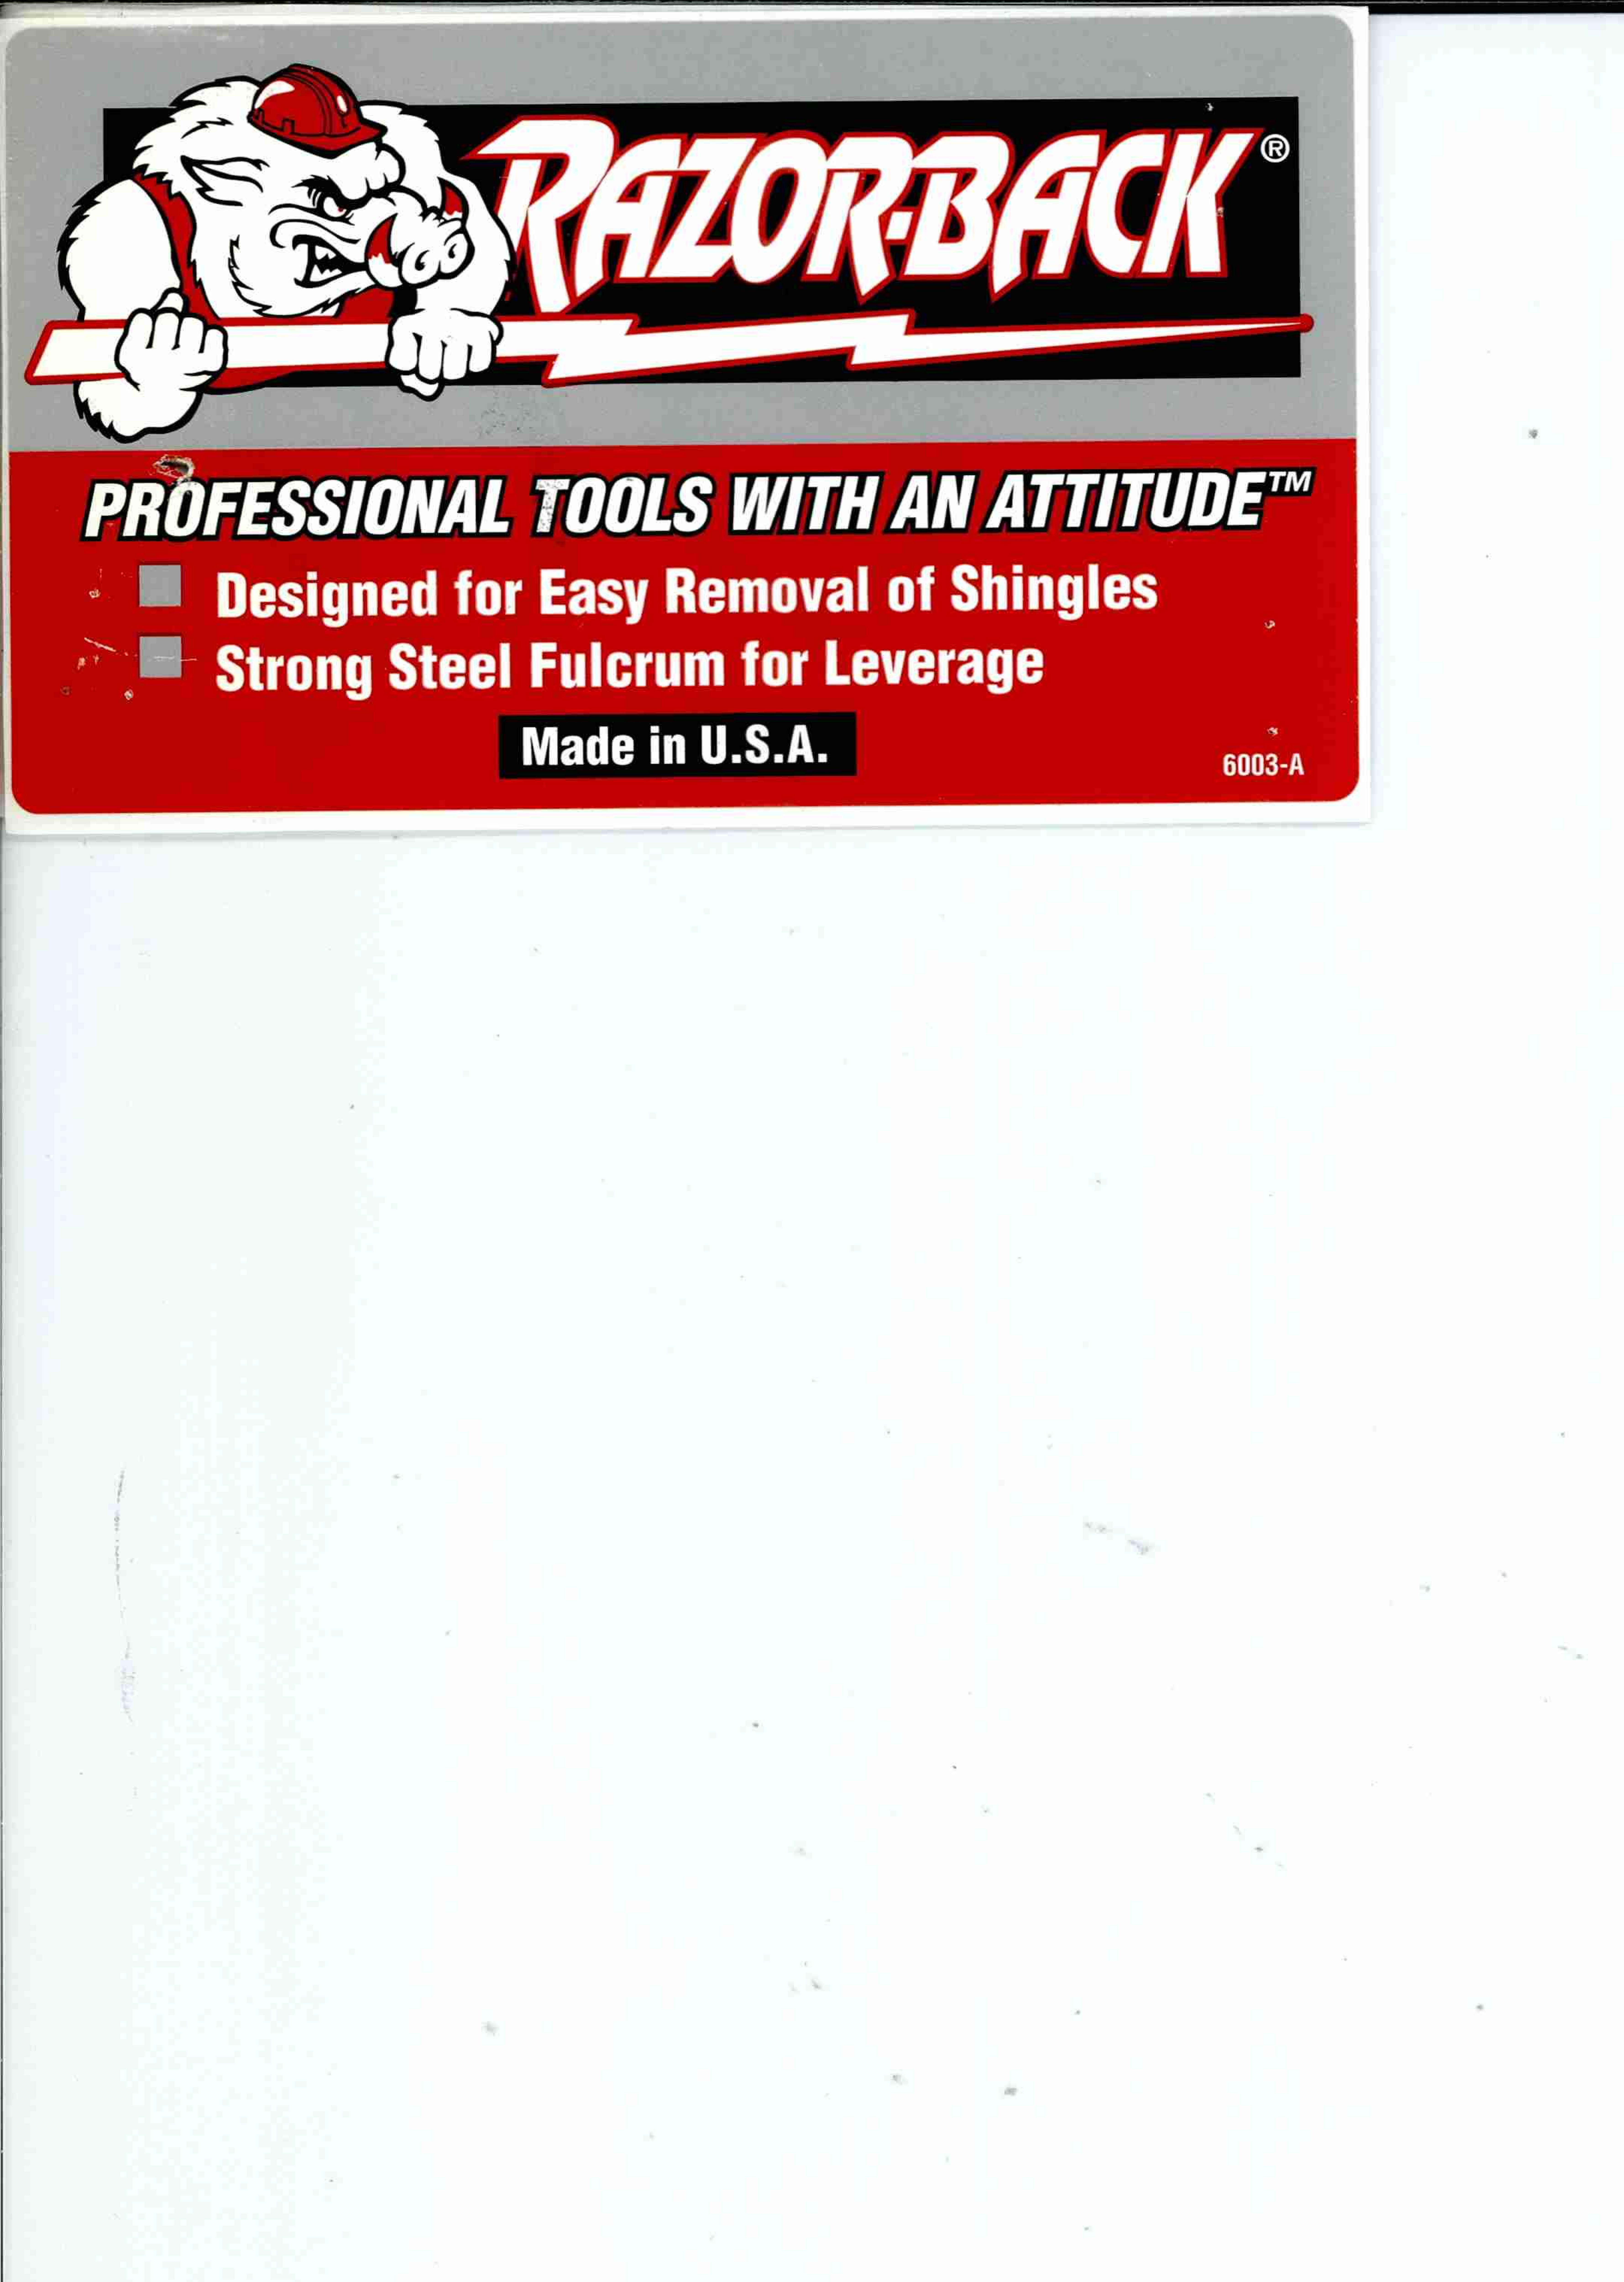  PROFESSIONAL TOOLS WITH AN ATTITUDE